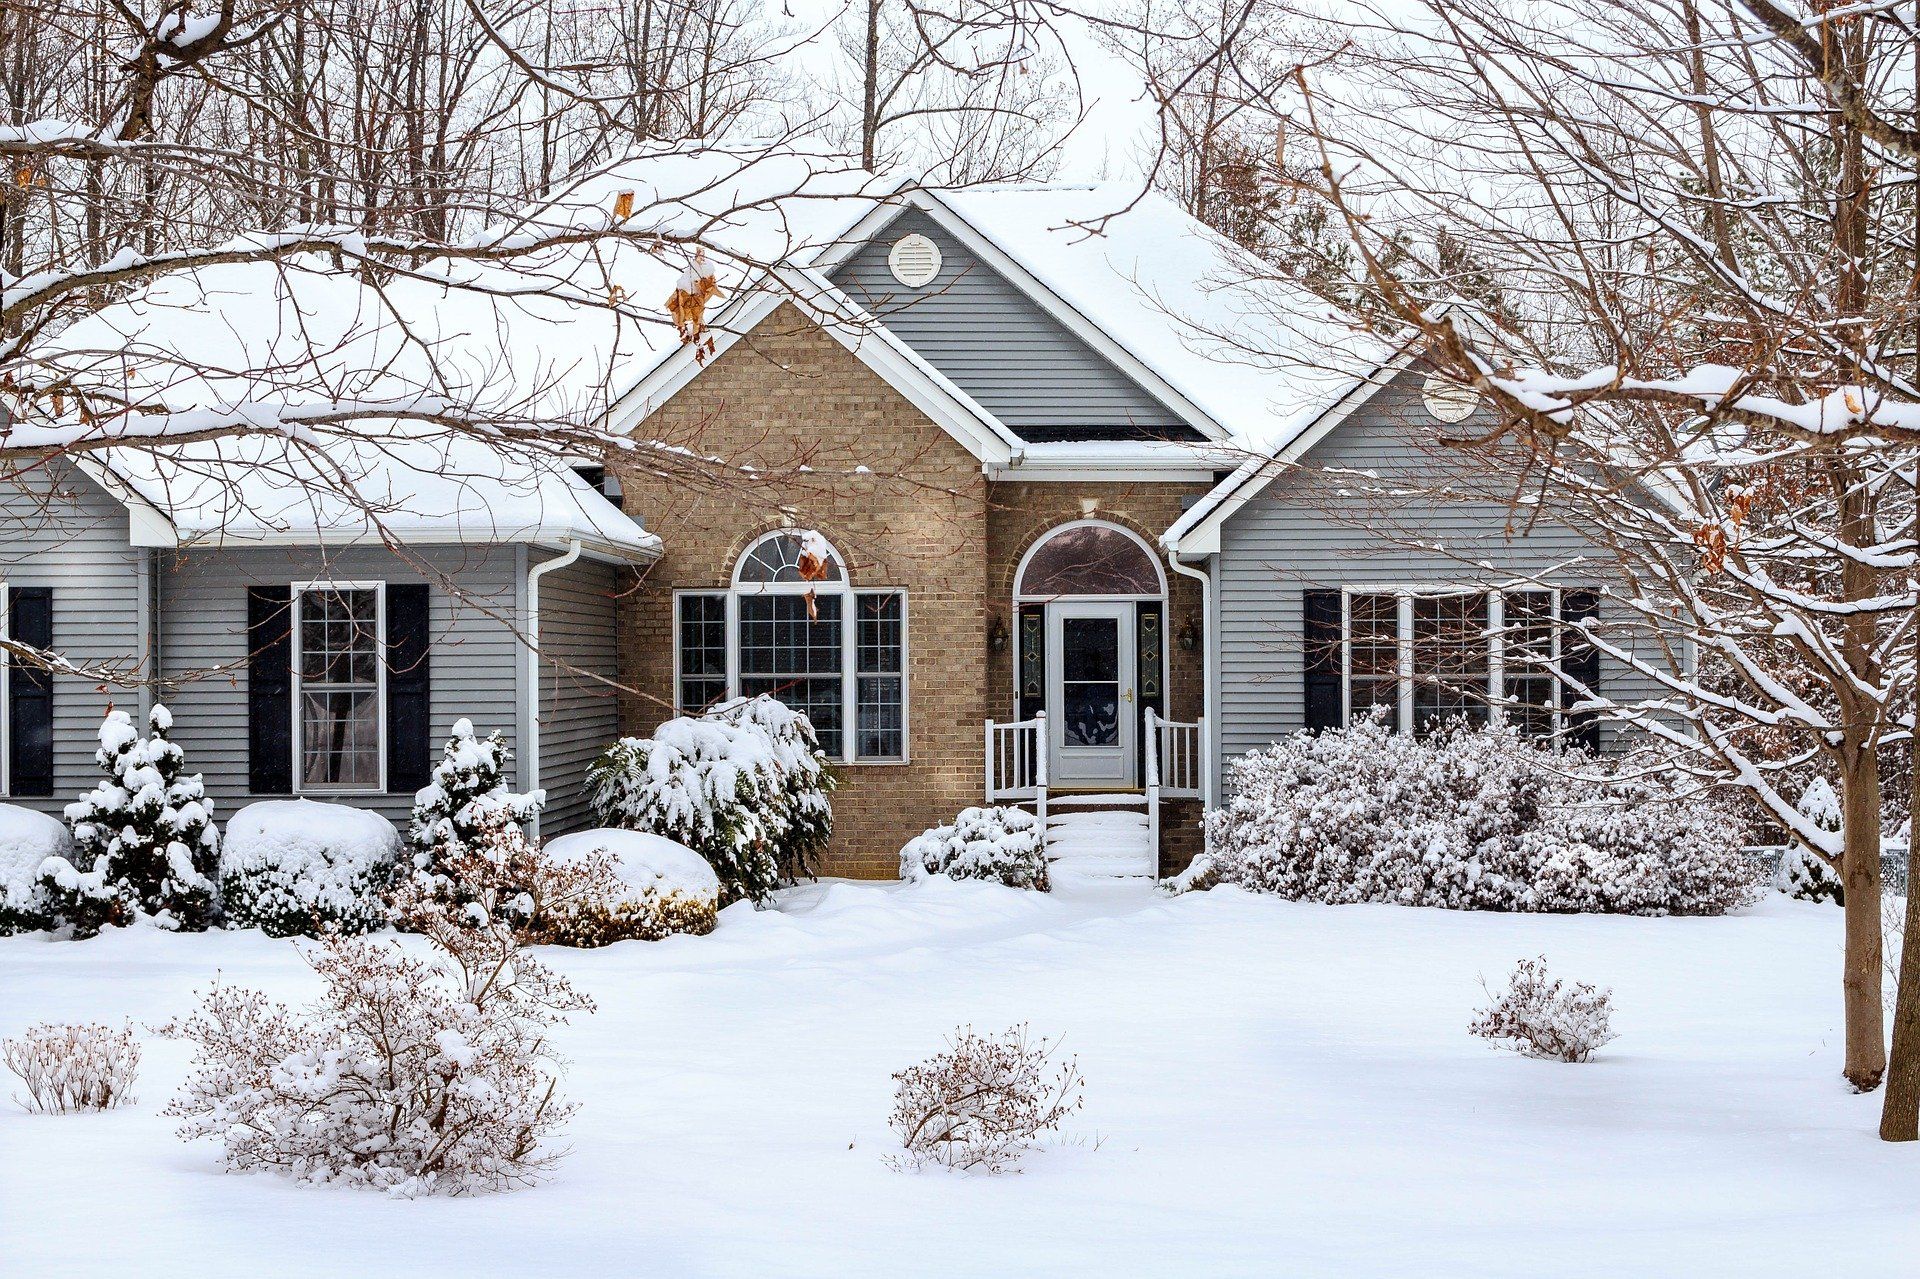 House Cover in Snow | Green Garden Landscaping